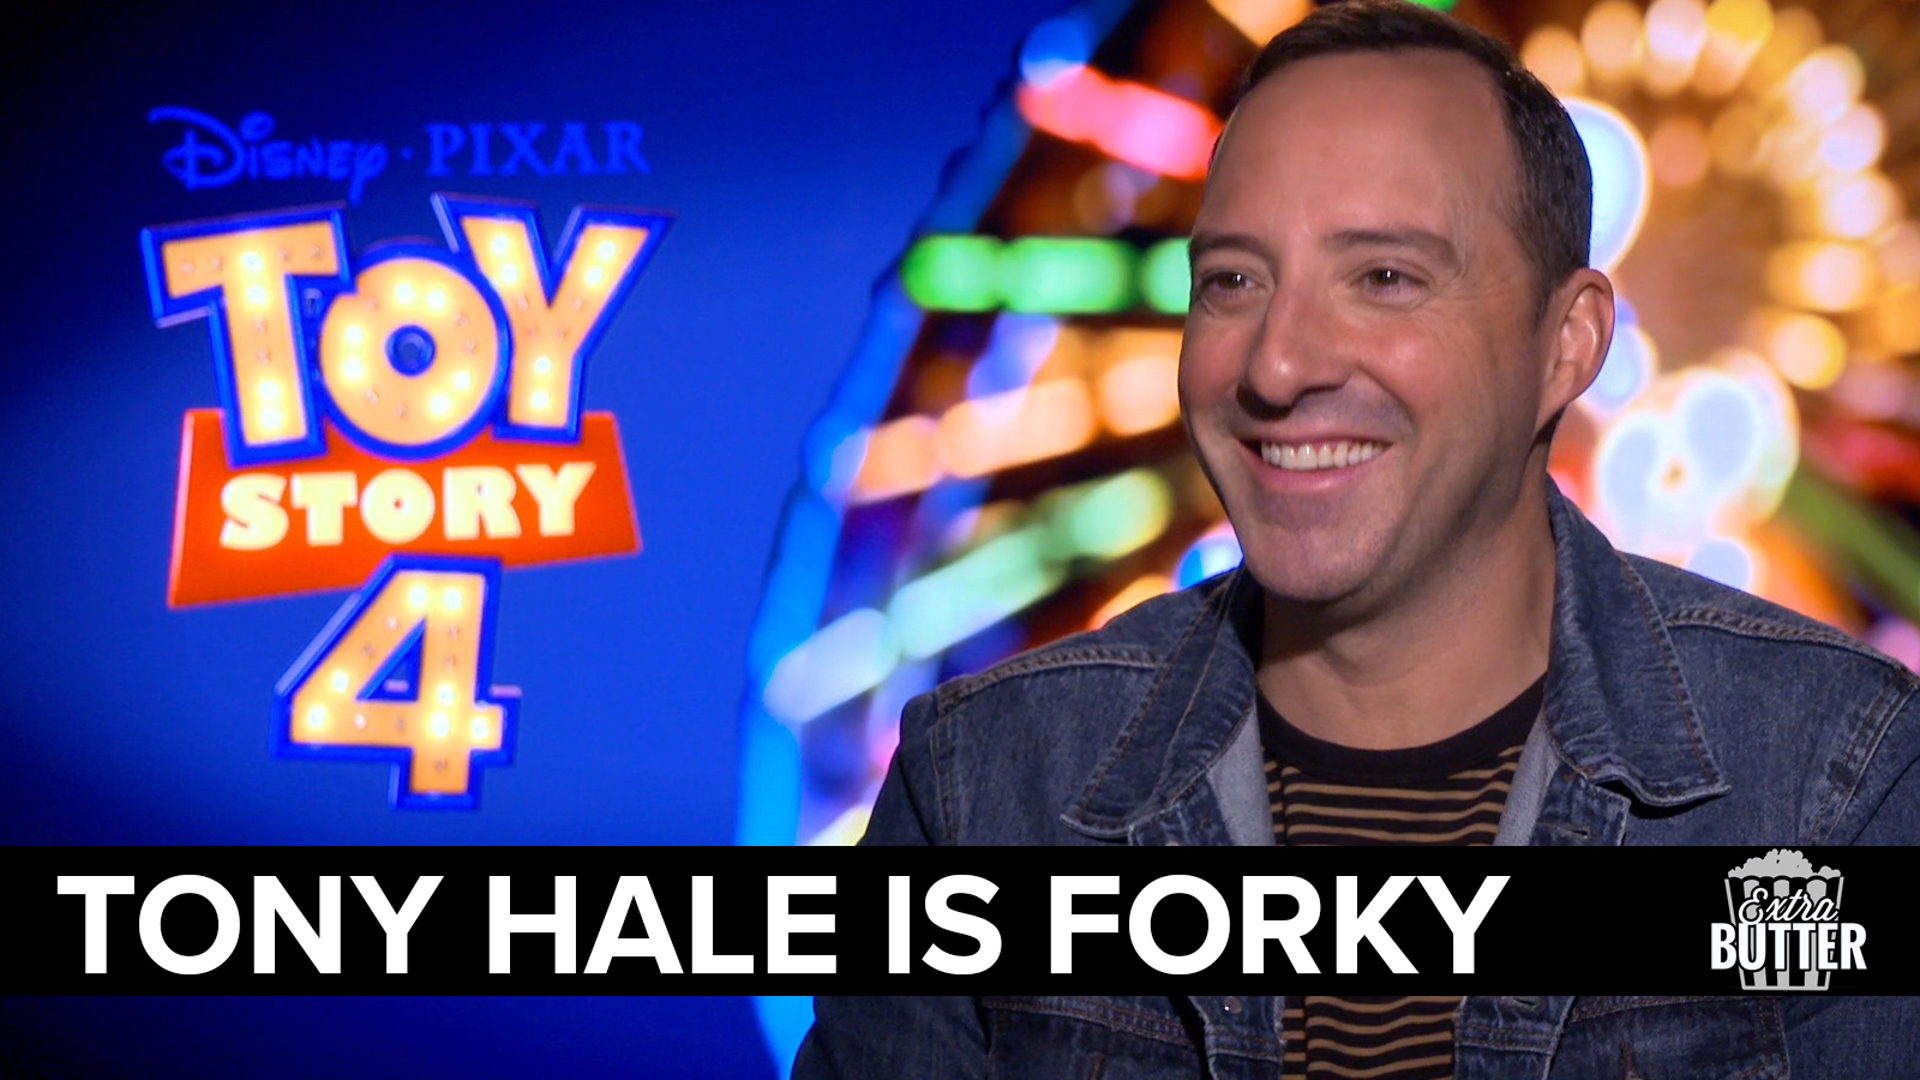 Tony Hale talks about his new character Forky from 'Toy Story 4.' If you pick up on bits of Buster from 'Arrested Development' or Gary Walsh from 'Veep.' it's no accident.